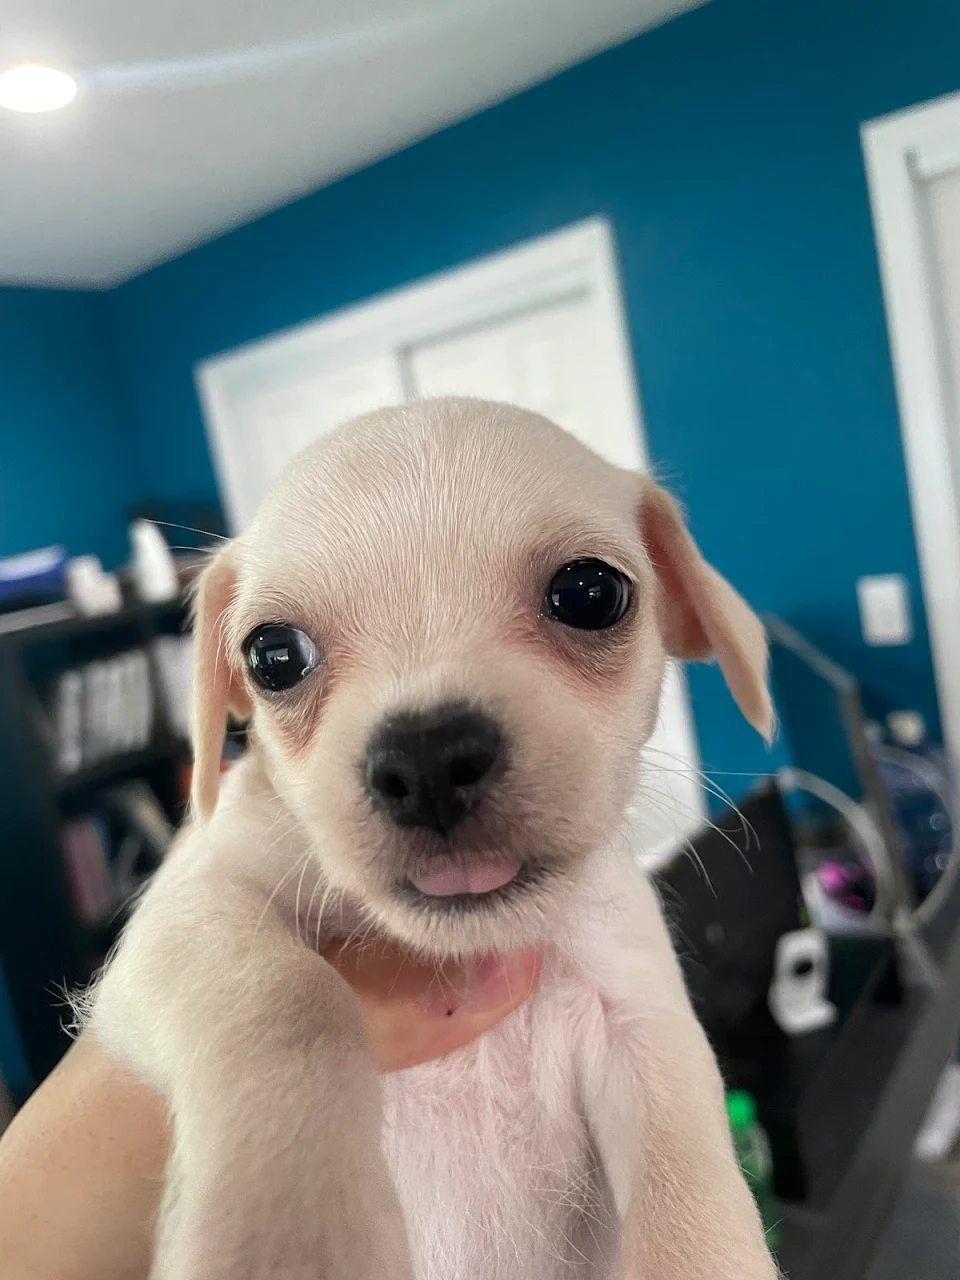 Here is a puppy blep. Have a good day.